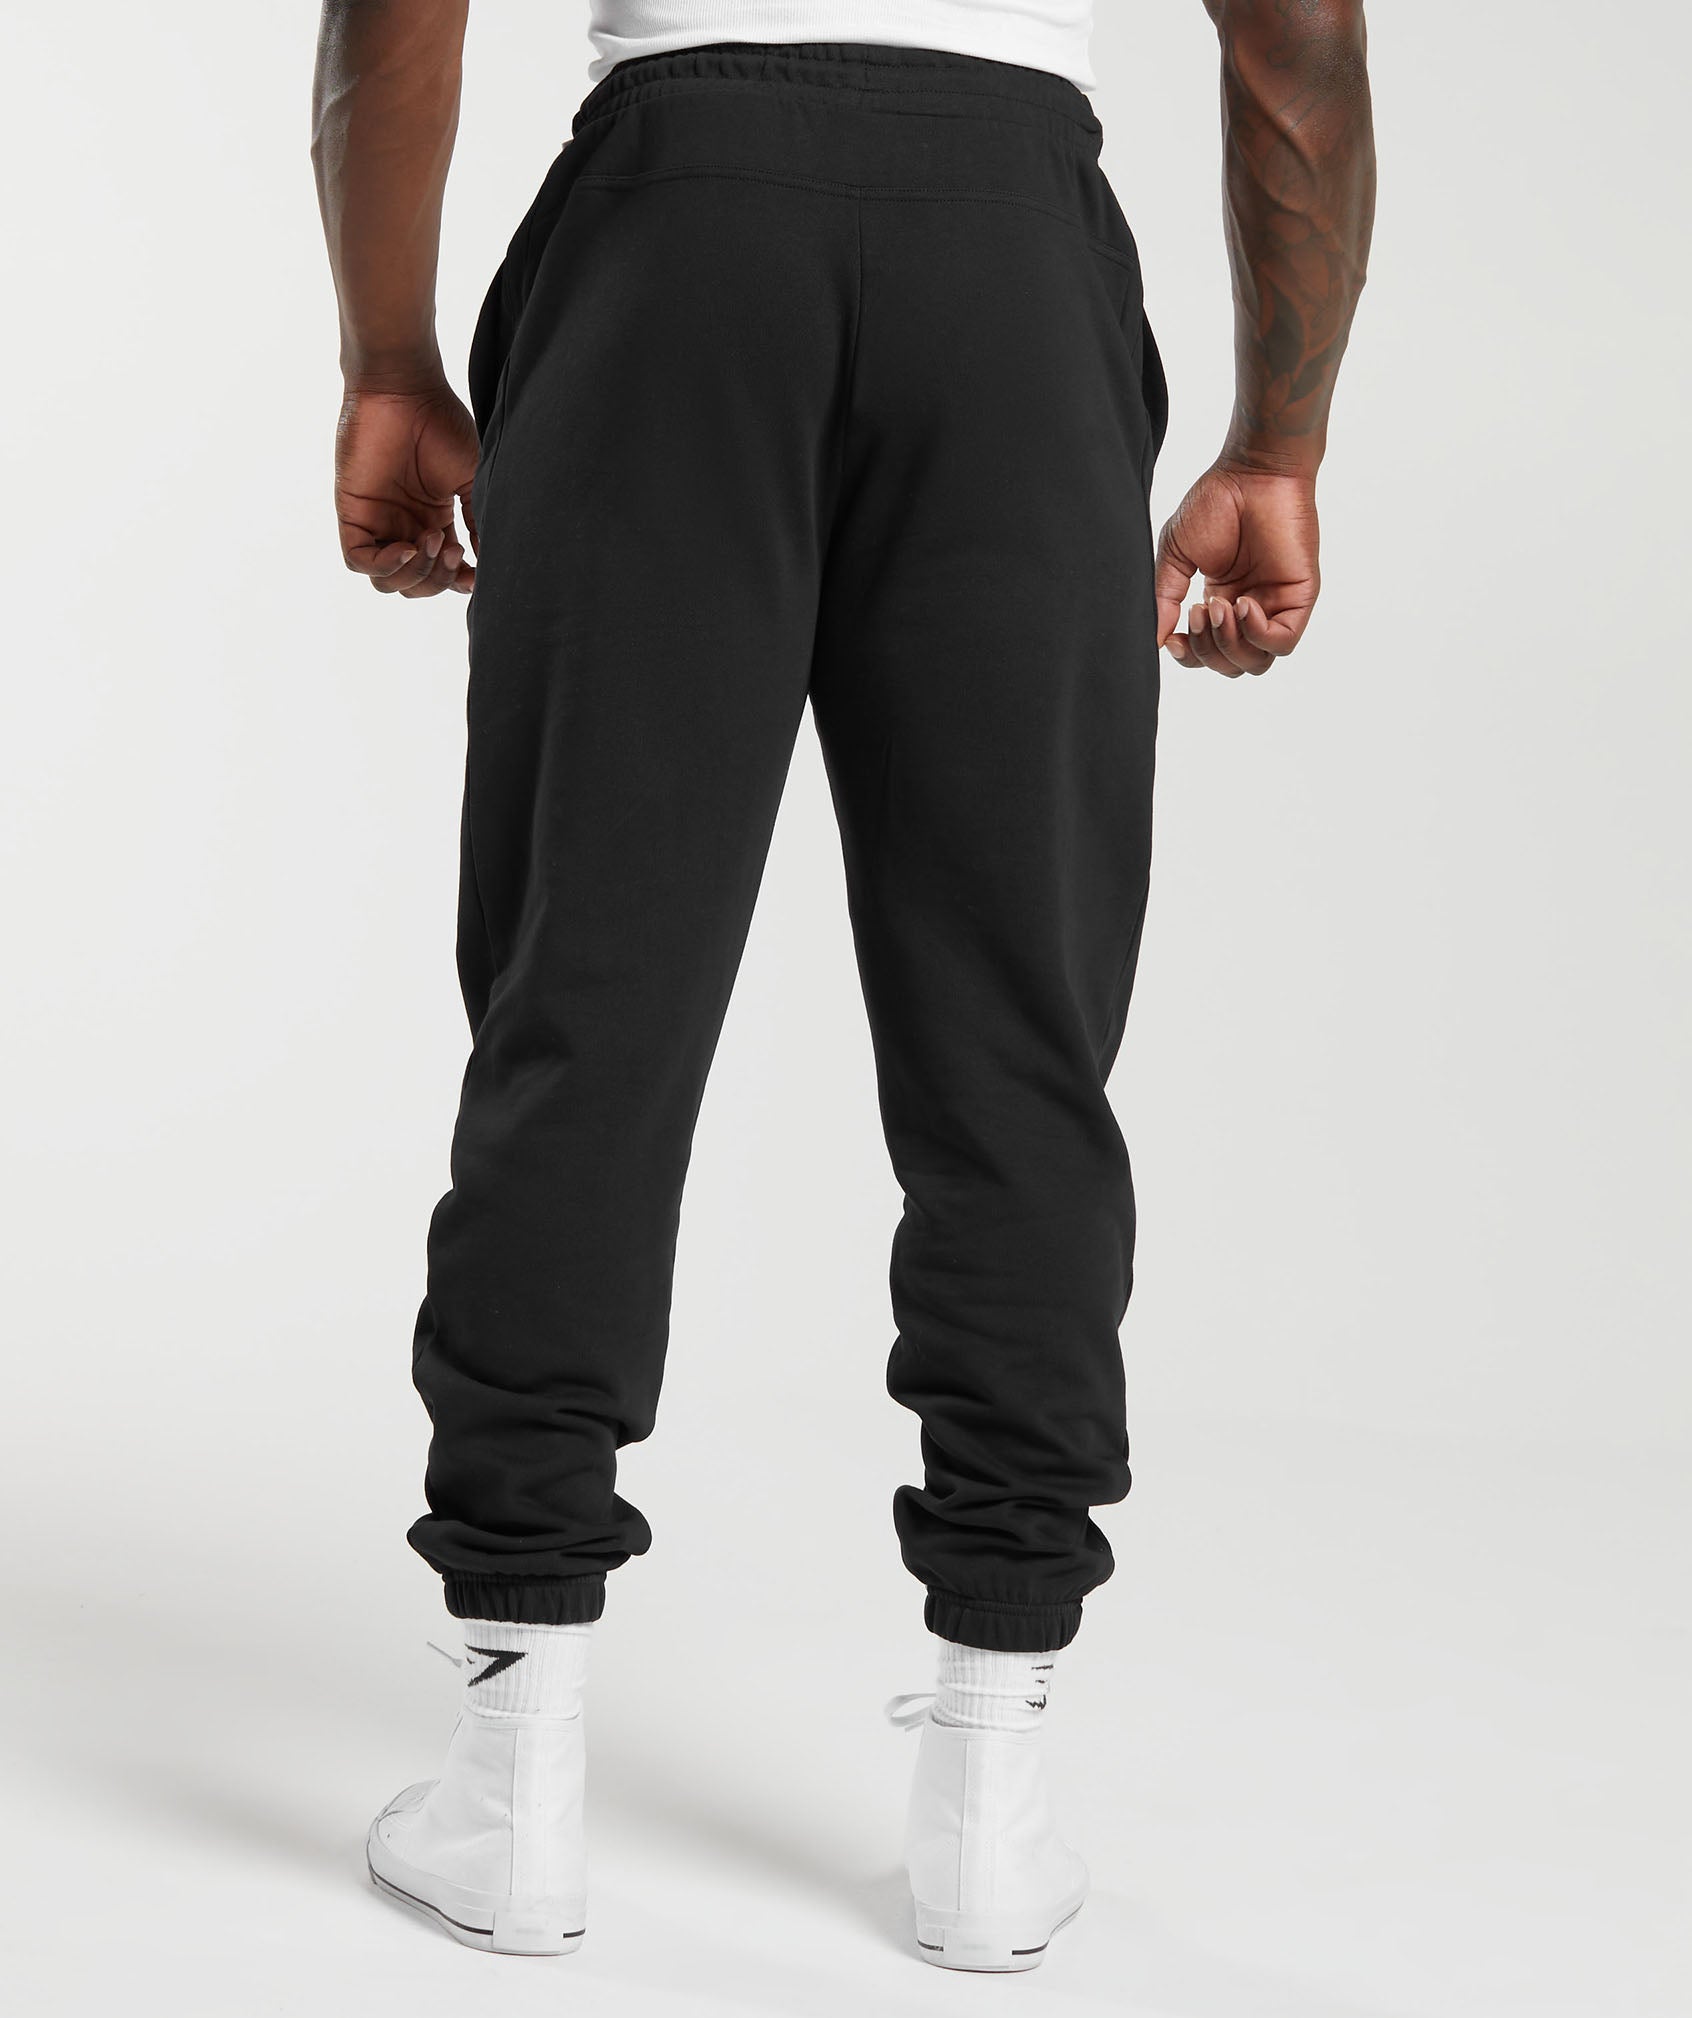 Global Lifting Oversized Joggers in Black - view 7